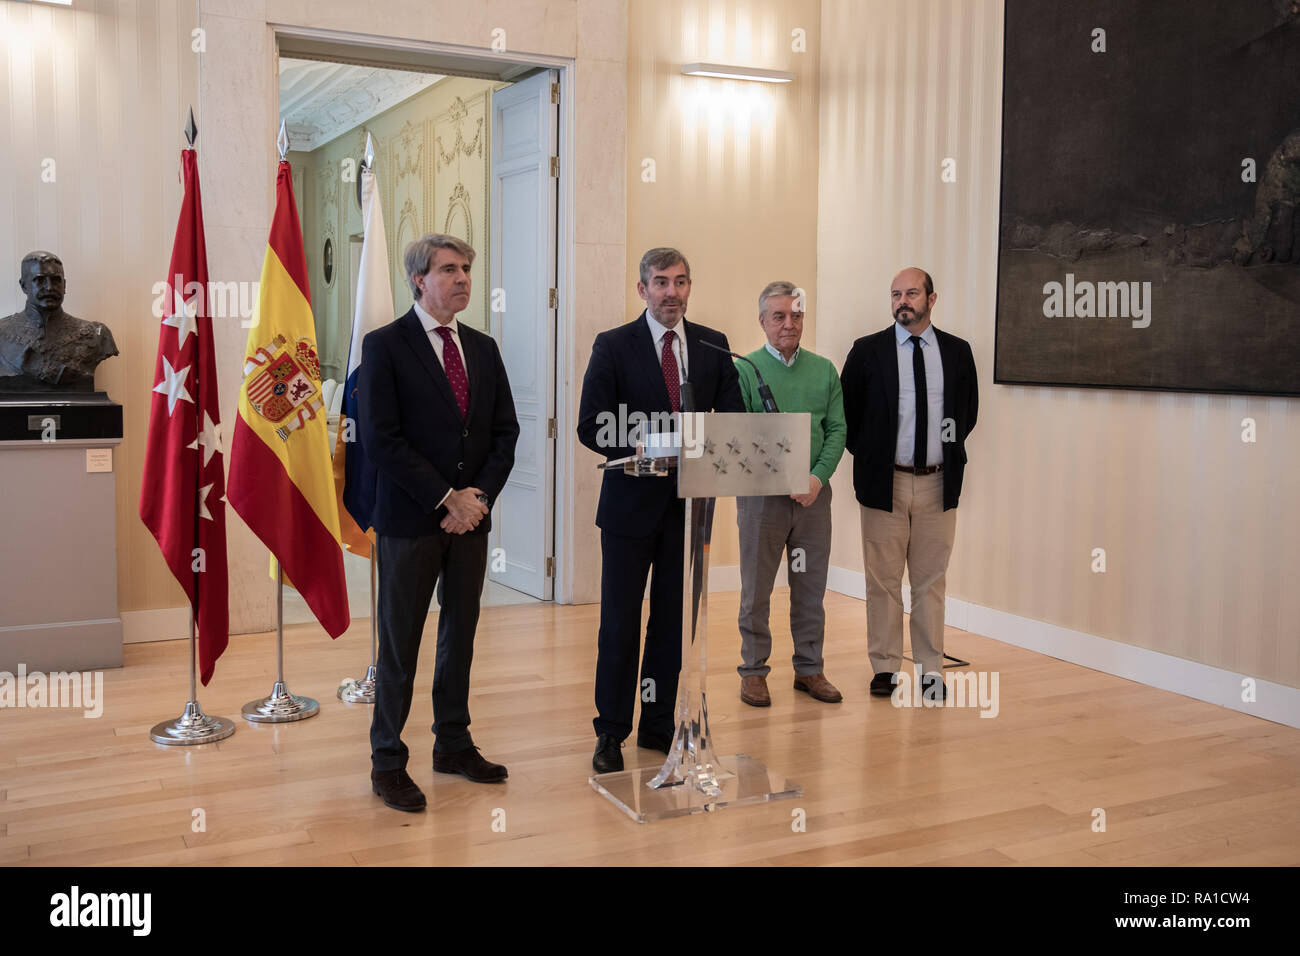 Madrid, Spain. 30th December 2018. ANGEL GARRIDO(left), The President of the Community of Madrid, FERNANDO CLAVIJO, The President of the Community of the Canary Islands and JESUS LOPEZ, watchmaker of Puerta del Sol. The president of the Community of Madrid, Ángel Garrido, has met with his Canarian counterpart, Fernando Clavijo, to review the latest preparations for the New Year bells, which tomorrow will offer the clock of Puerta del Sol and this year will sound also in the Canary spindle on Dec 30, 2018 in Madrid, Spain Credit: Jesús Hellin/Alamy Live News Stock Photo